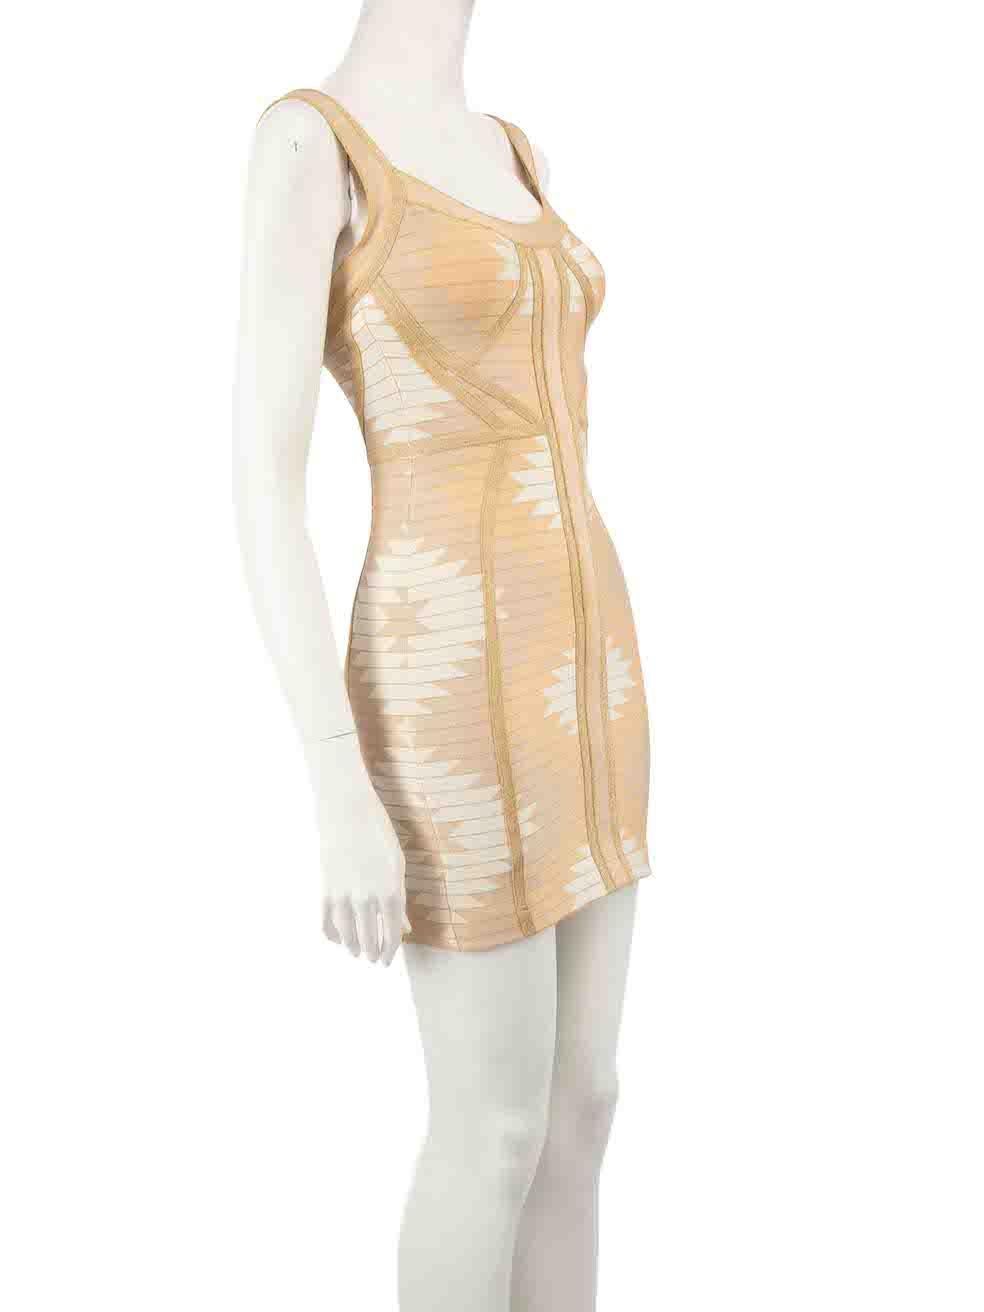 CONDITION is Very good. Minimal wear to dress is evident. Minimal wear to the front, back and shoulder straps with plucks to the weave on this used Herve Leger designer resale item.
 
 
 
 Details
 
 
 Beige
 
 Rayon
 
 Bandage bodycon dress
 
